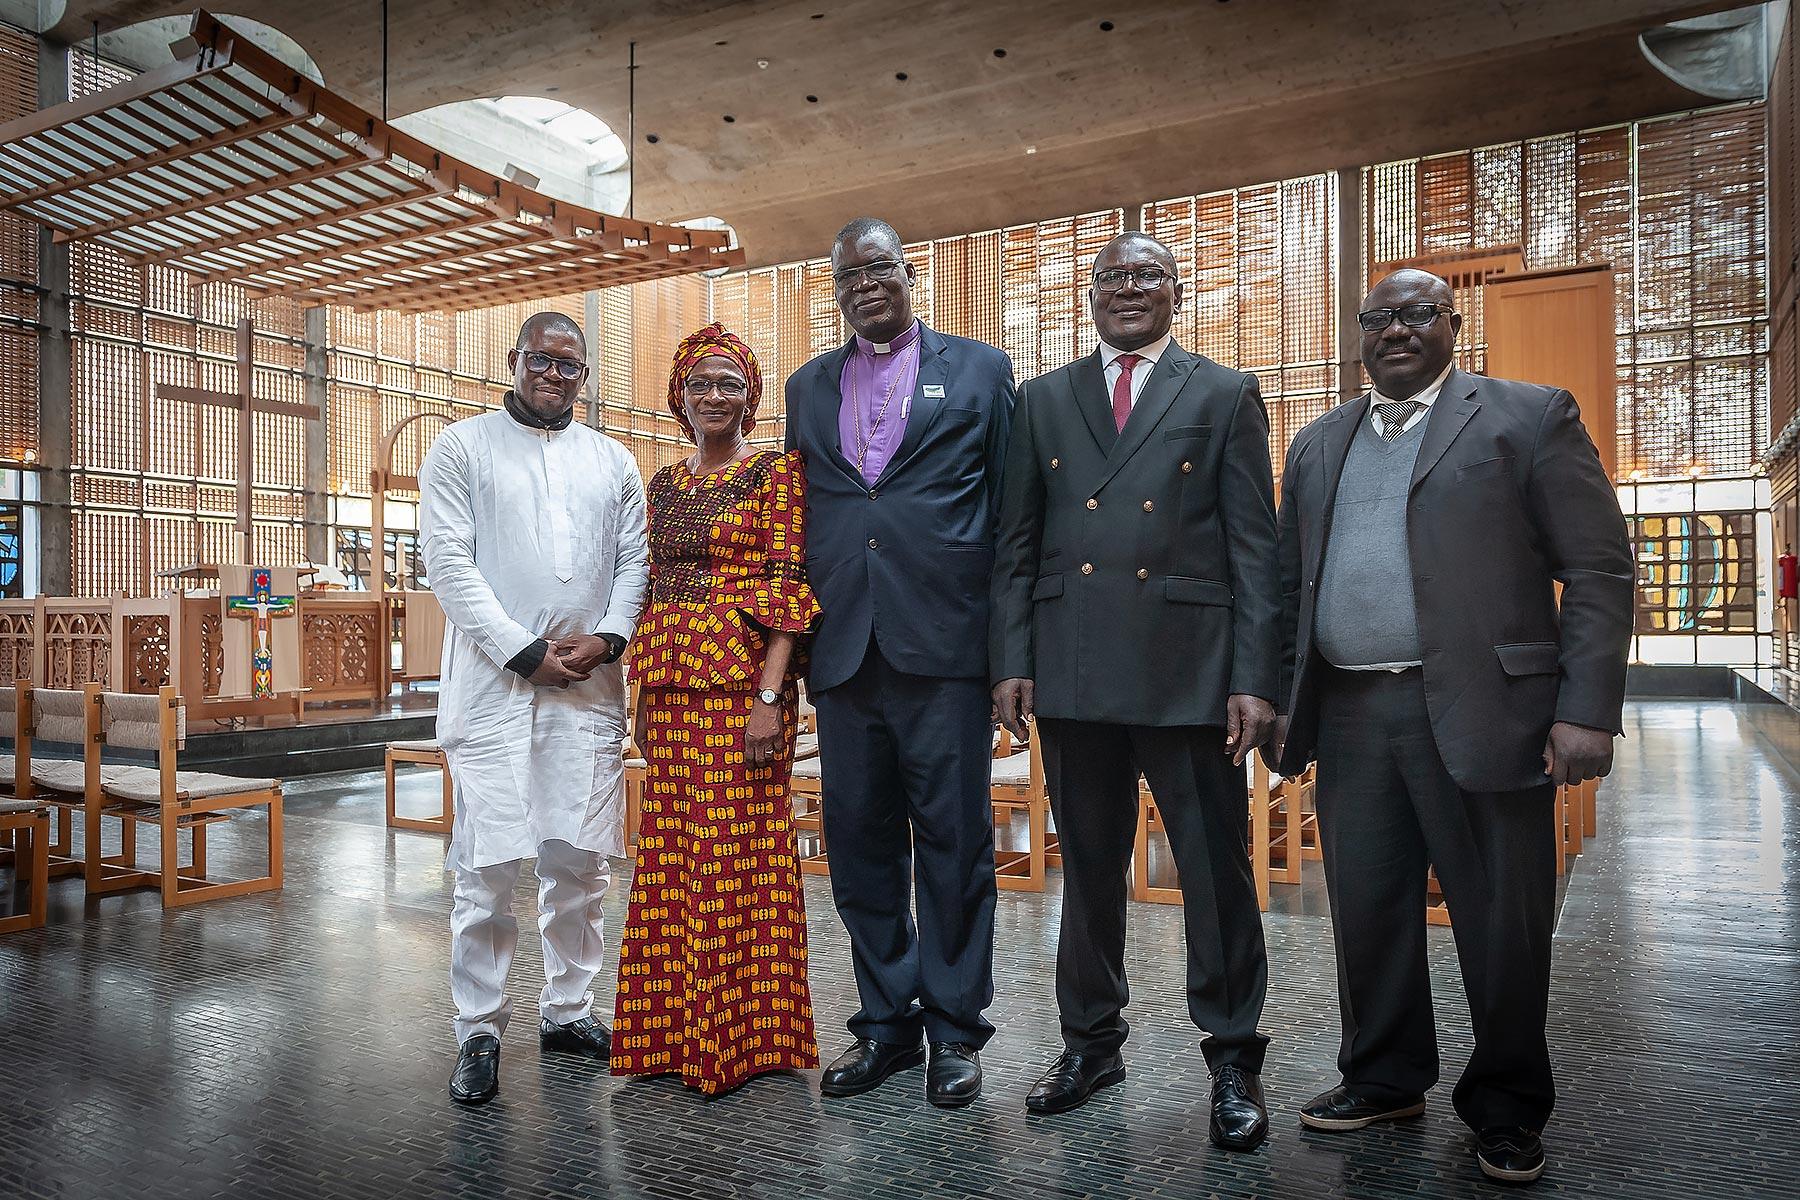 Delegation members of the Nigerian civil society coalition. Photo: LWF/S. Gallay